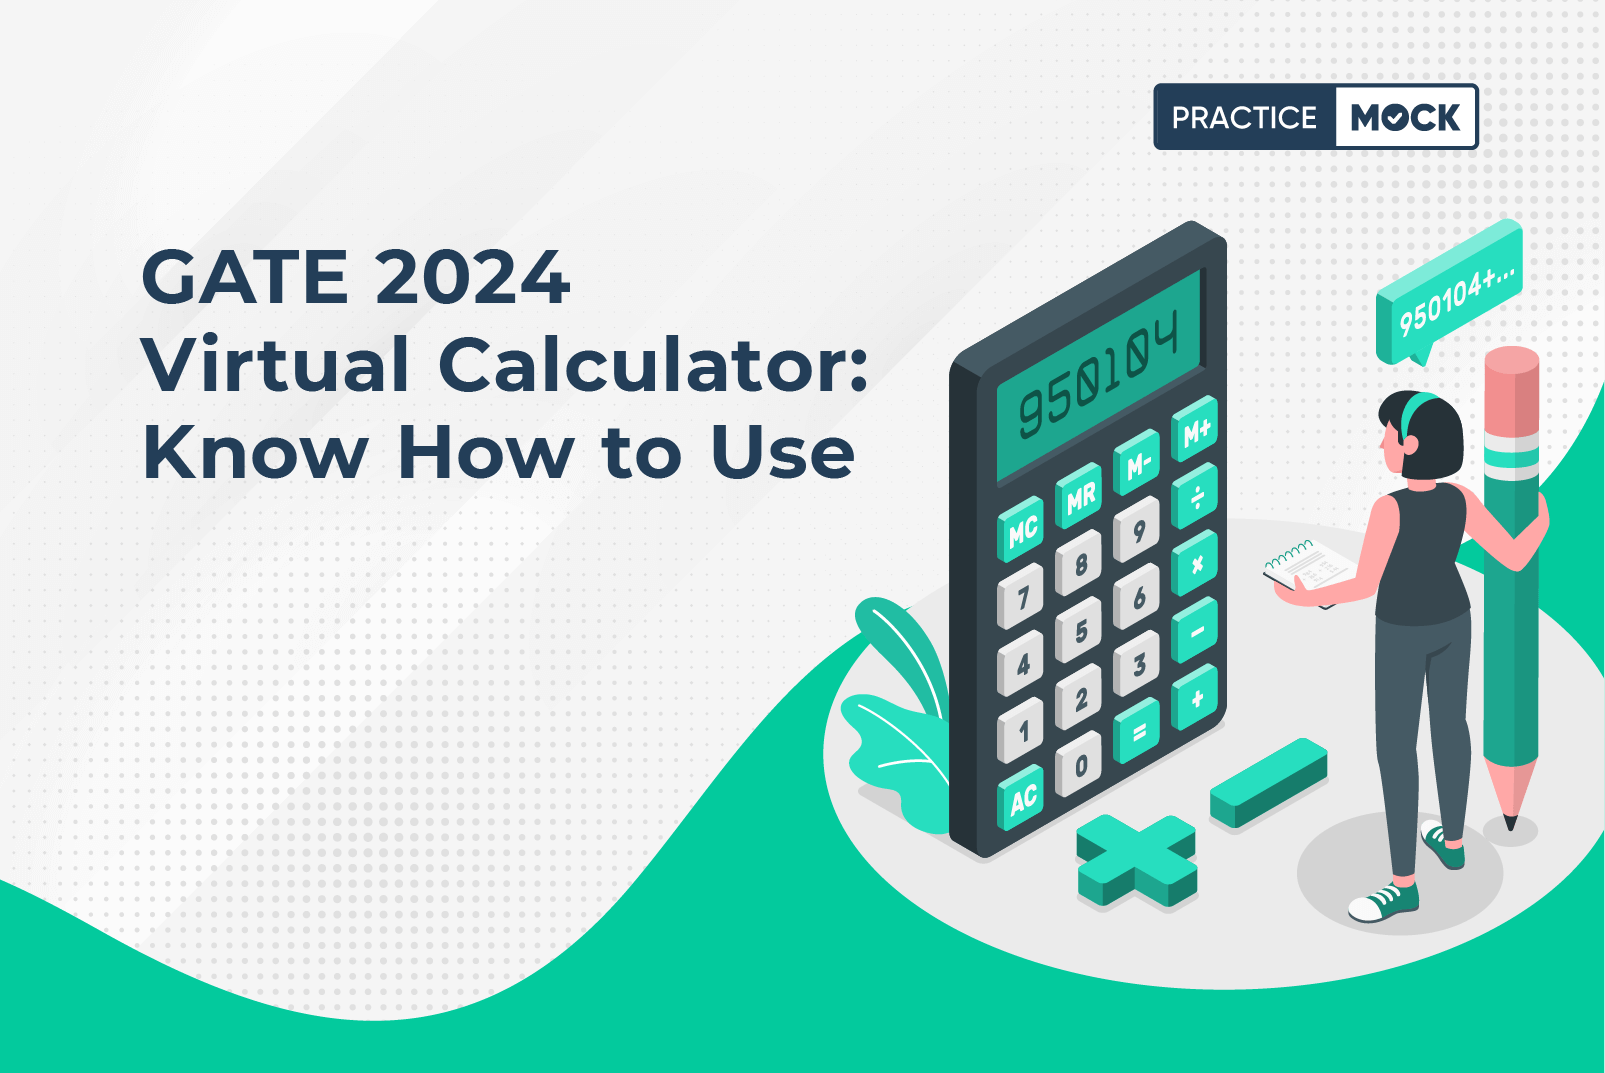 GATE 2024 Virtual Calculator Know How to Use PracticeMock